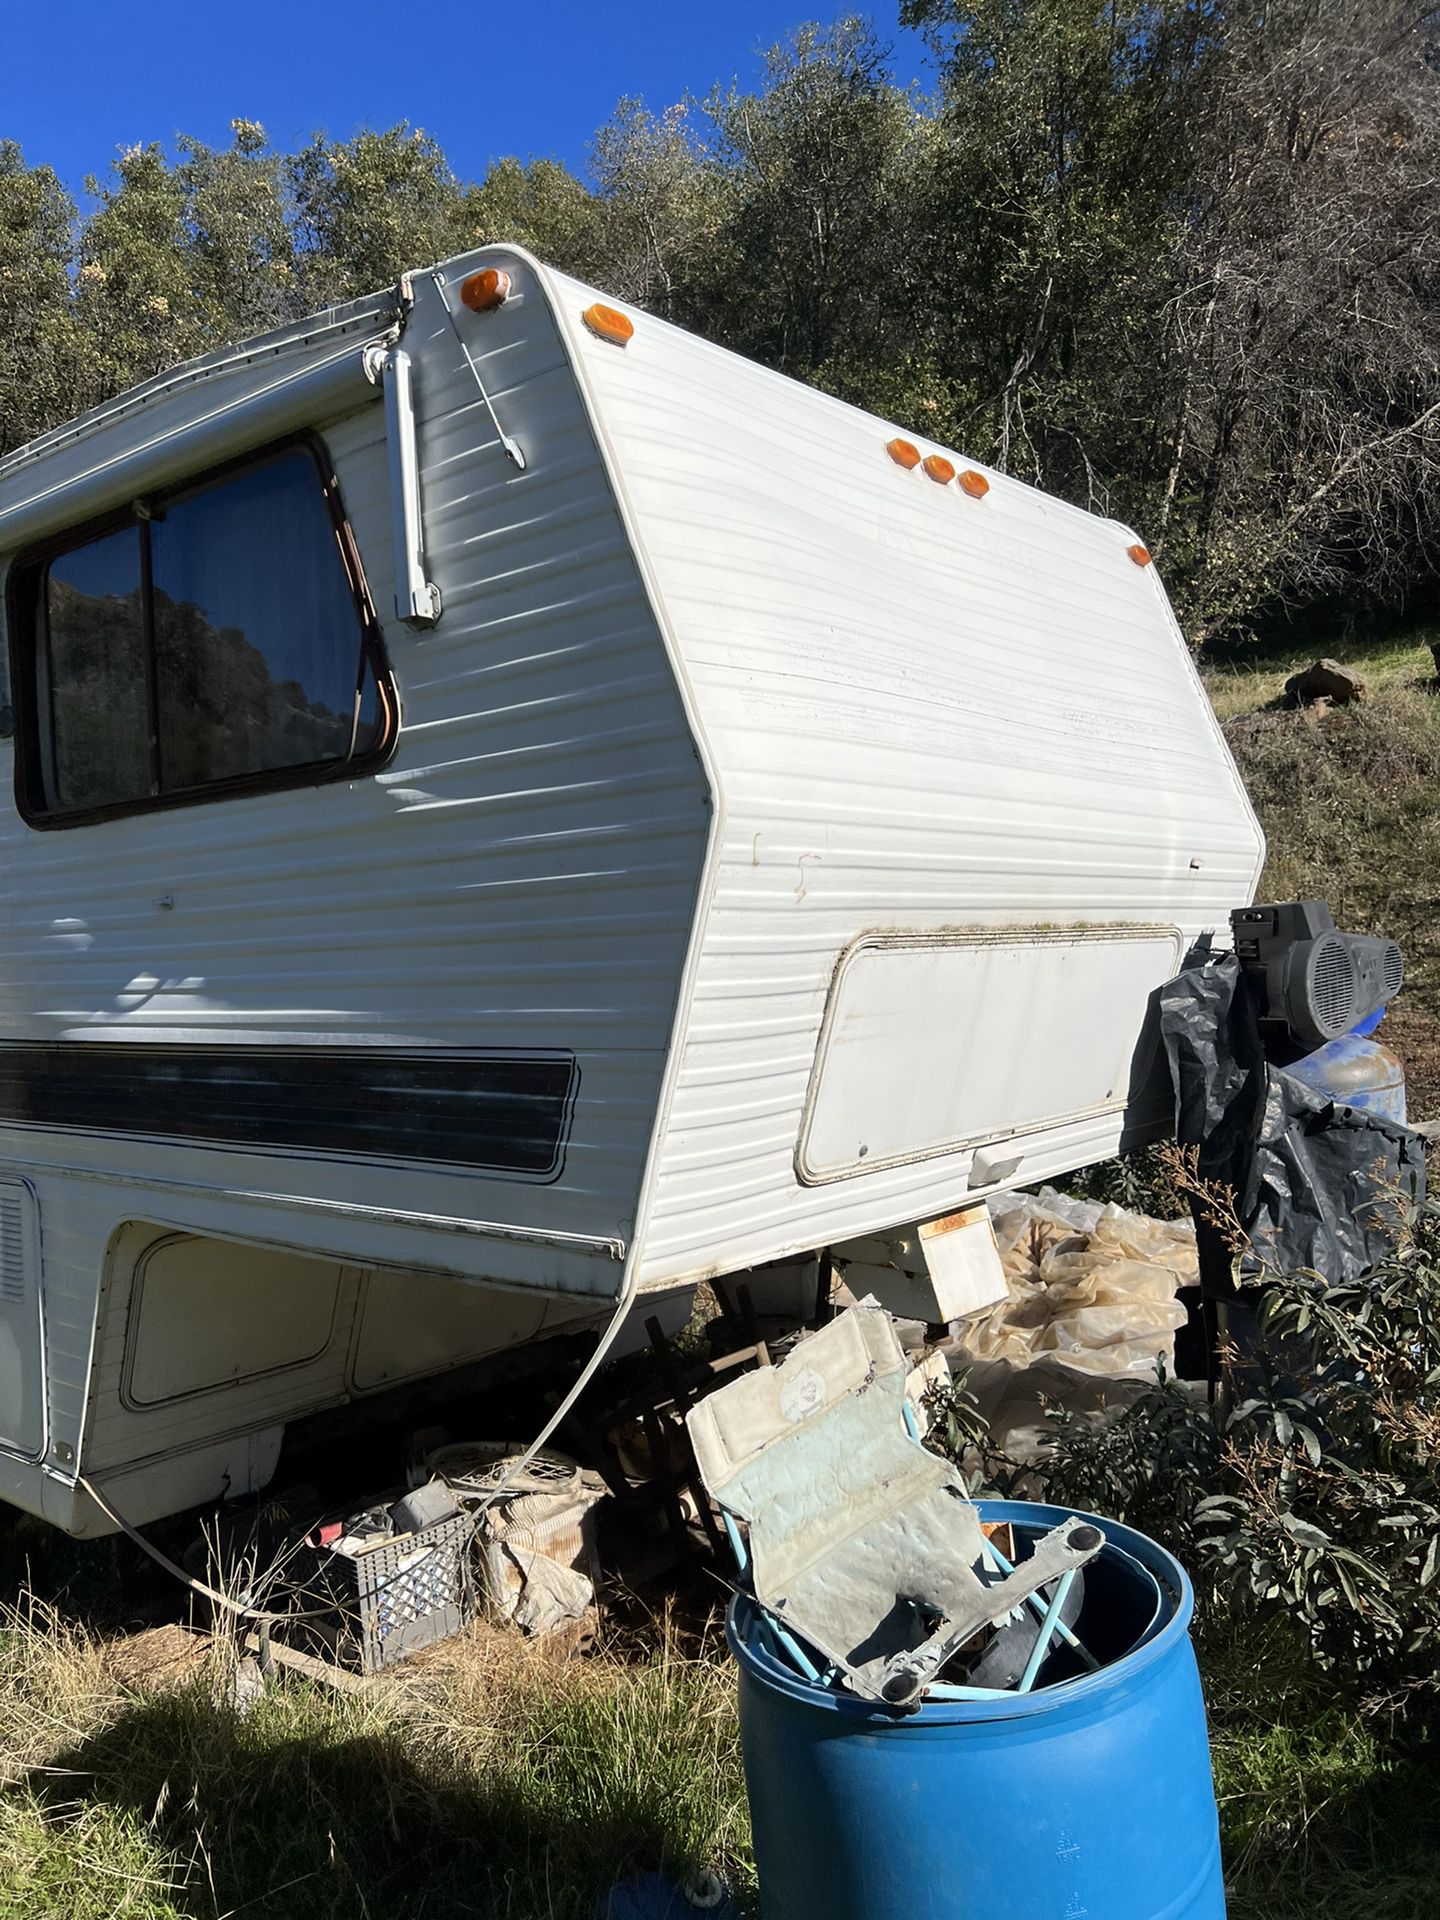 Trailer / Rv Has Rat Poop And Is Rottened May Need To Be Rebuilt Or Cleaned . 